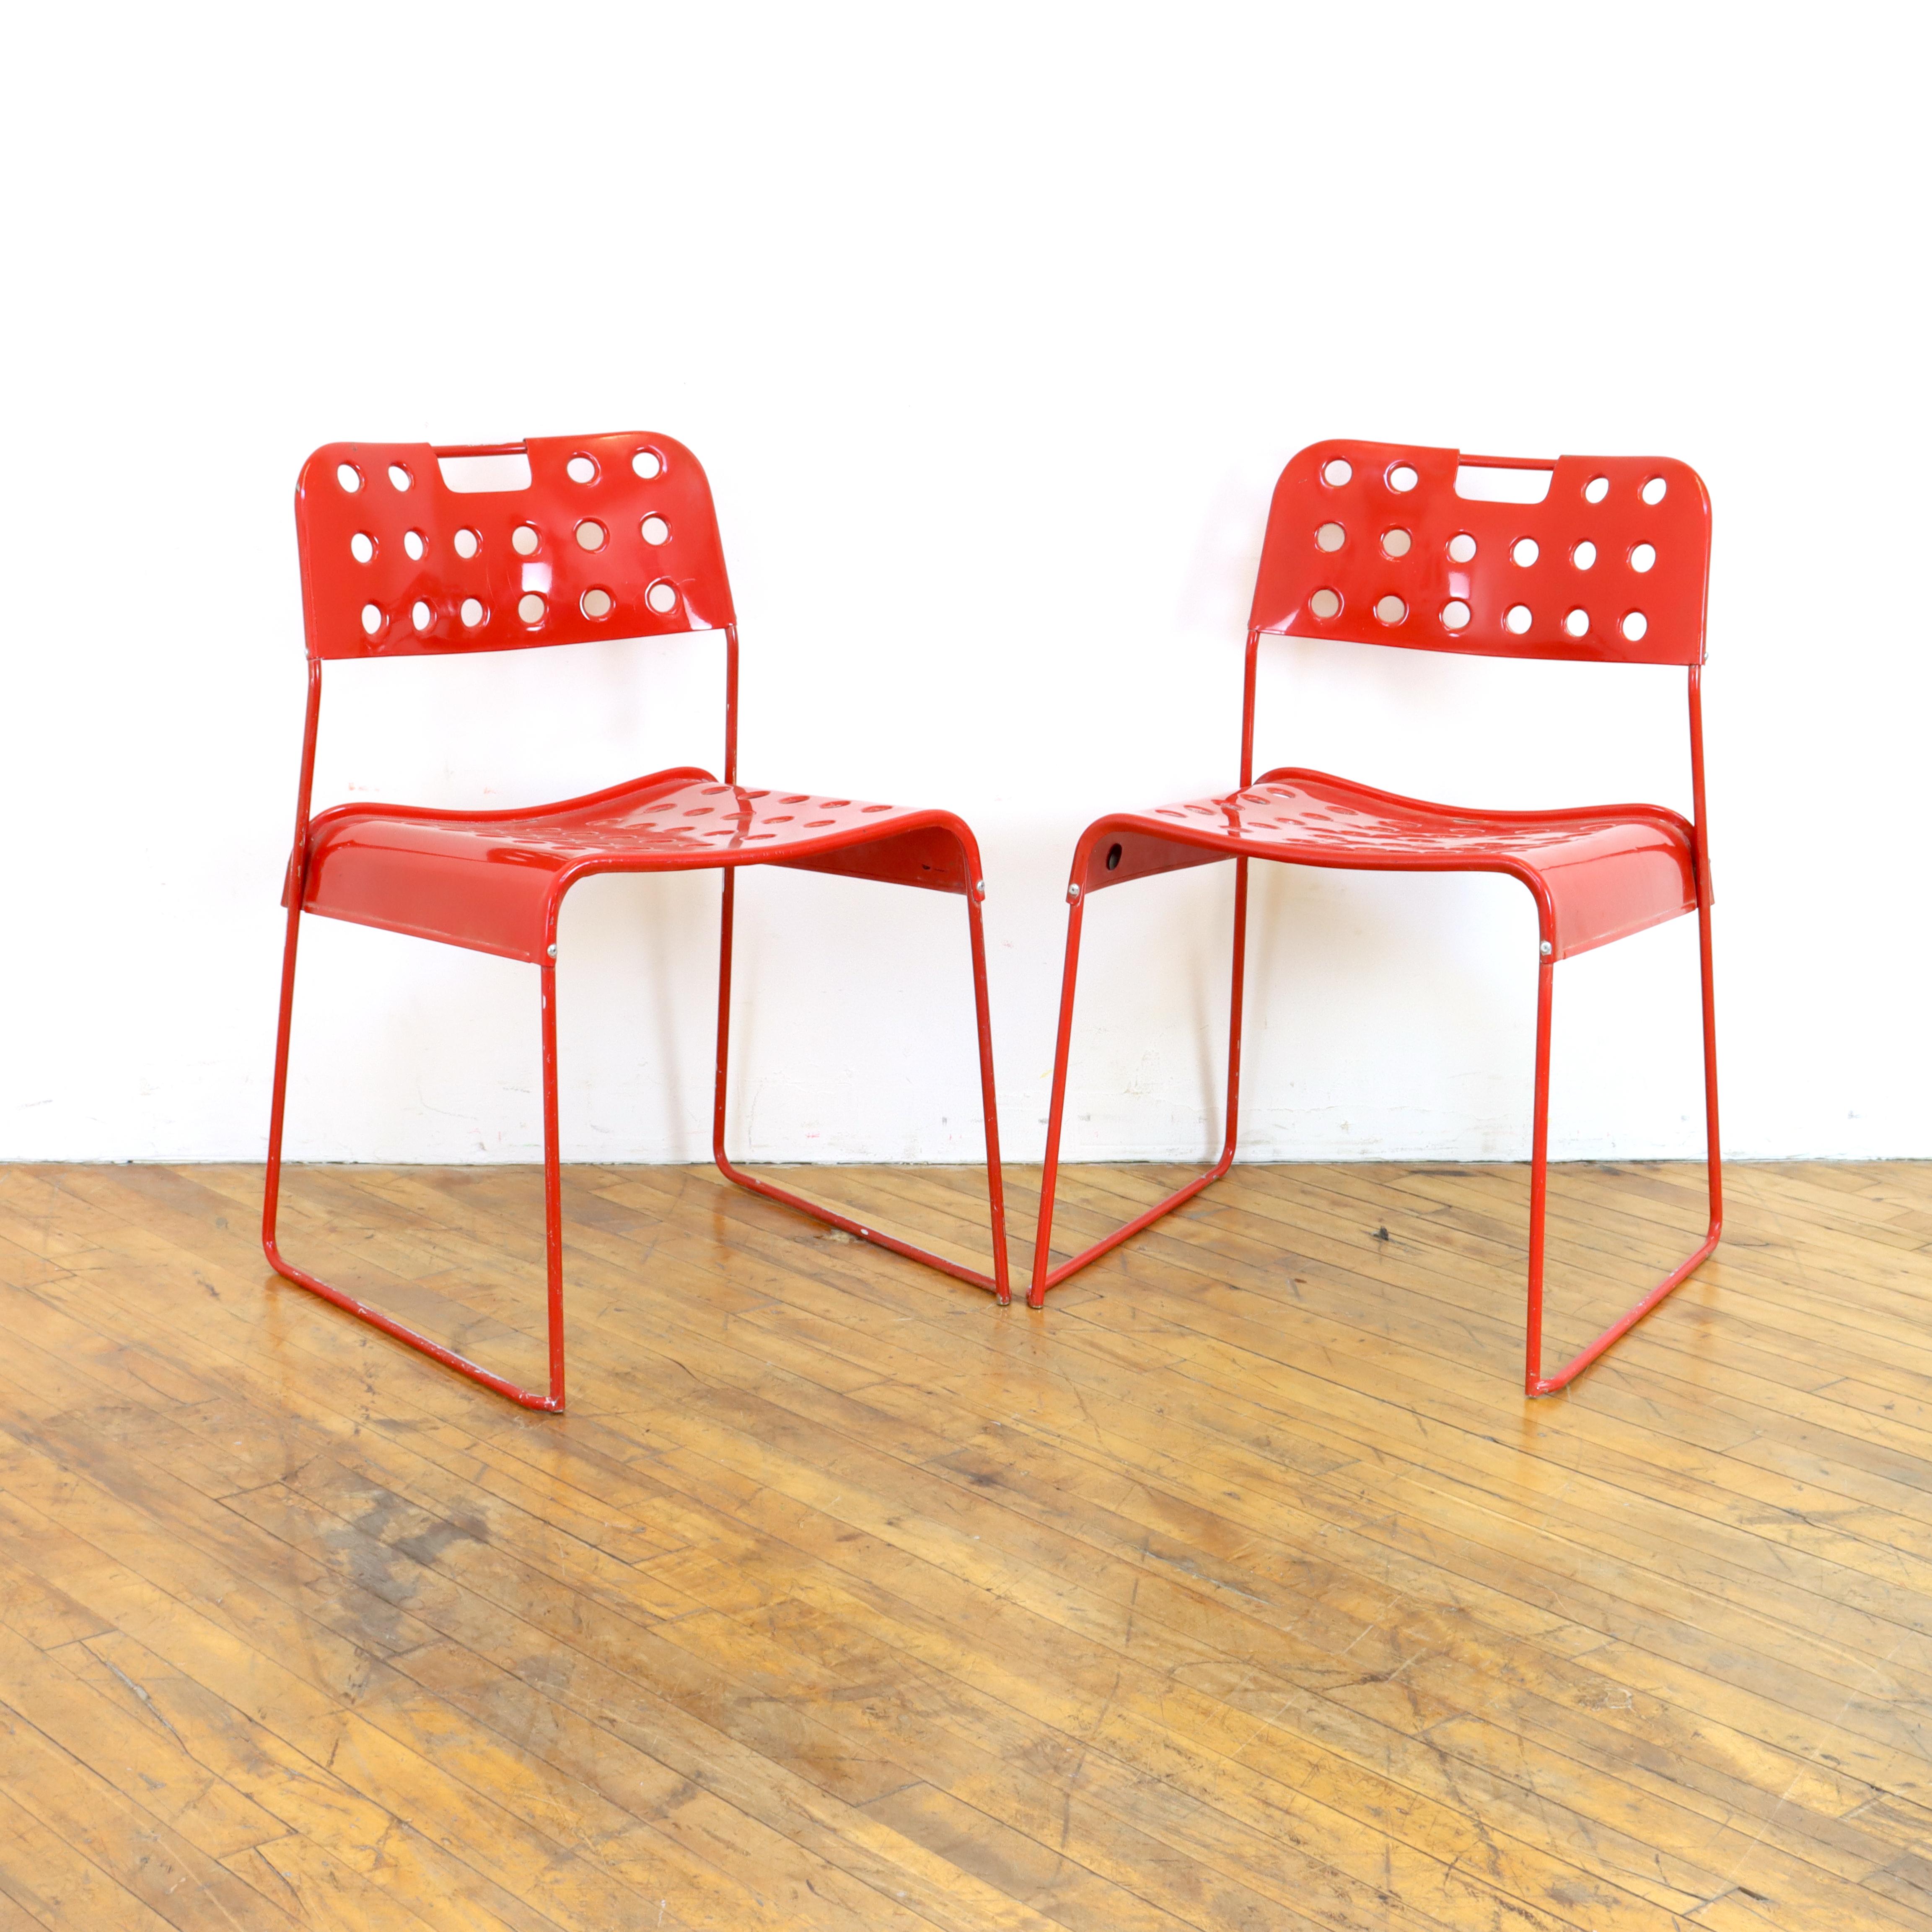 Pair of vintage 1970s Omkstak chairs in red by Rodney Kingsman for Bieffeplast. Wire frame and perforated 
metal seat and back, powder coated.  As the name suggest, they also stack.  Can be used indoors or out.  

18.5” W x 18” D x 30” H
Seat